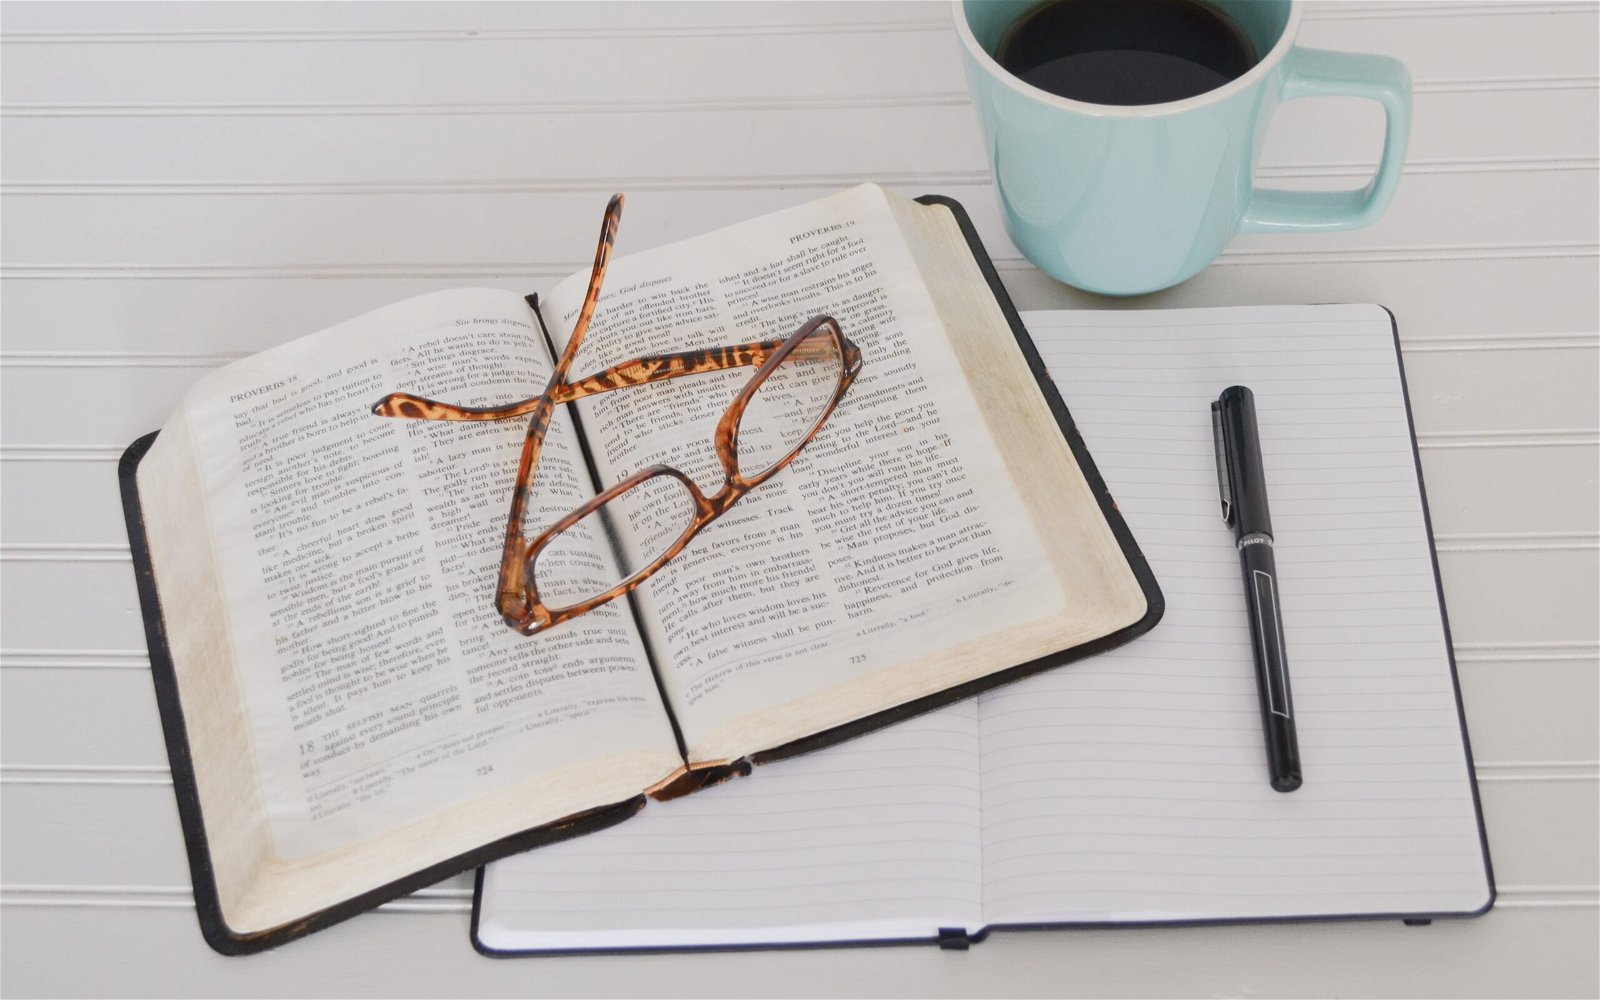 The Power of the Pen: Reflecting on the Word with a Pen